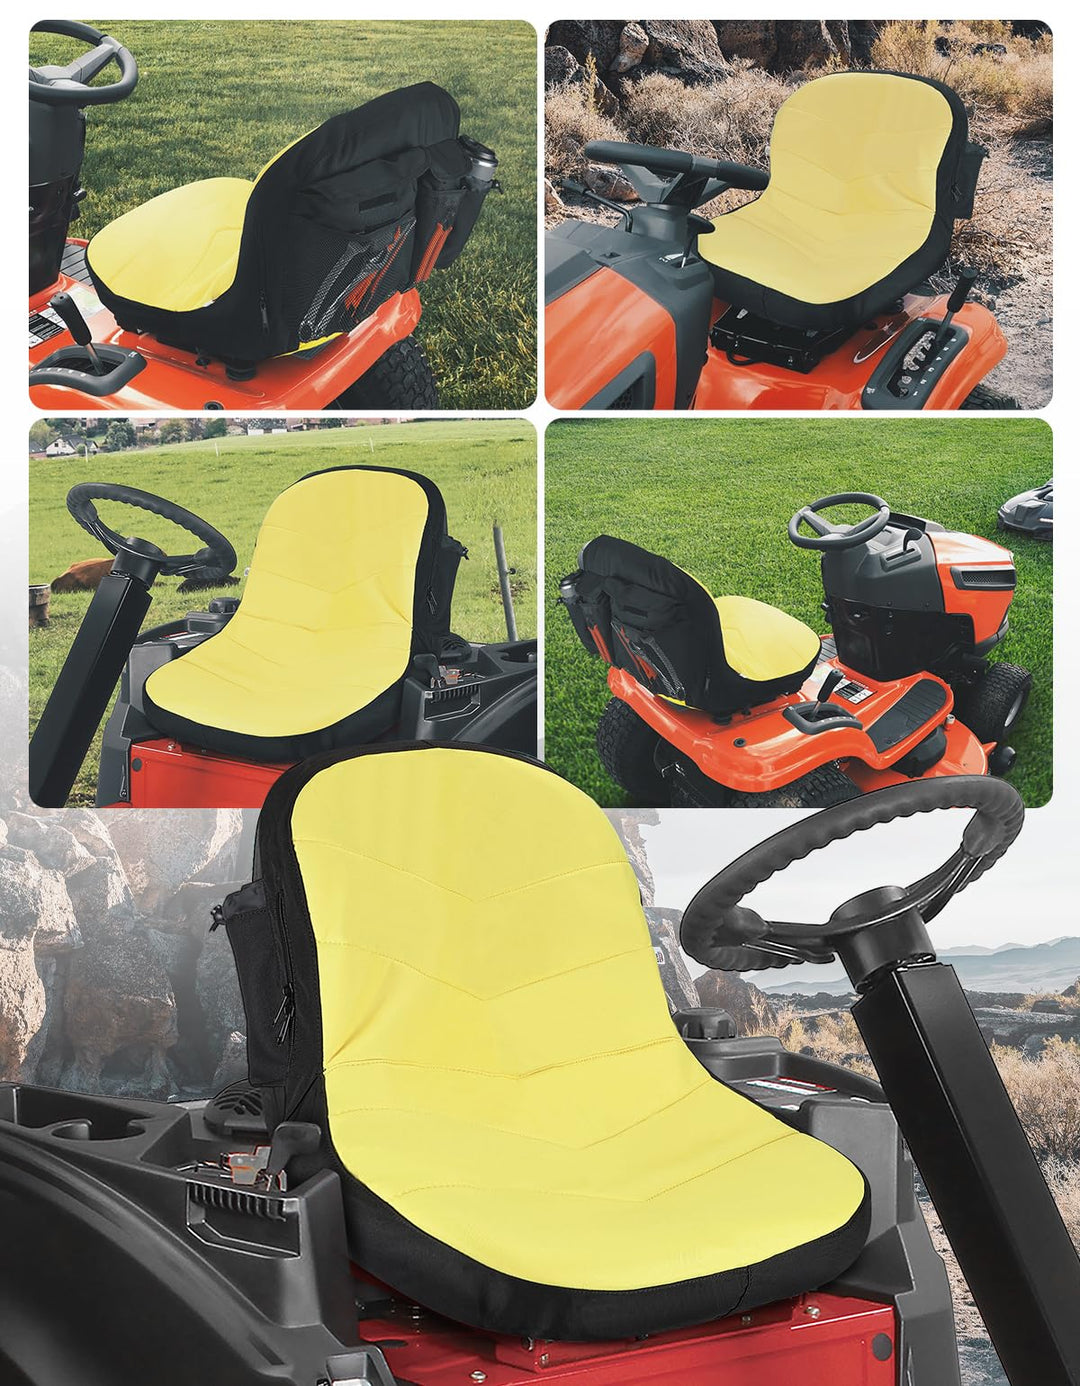 Universal Riding Lawn Mower Seat Cover For 12.5"-14" High Seats - Kemimoto